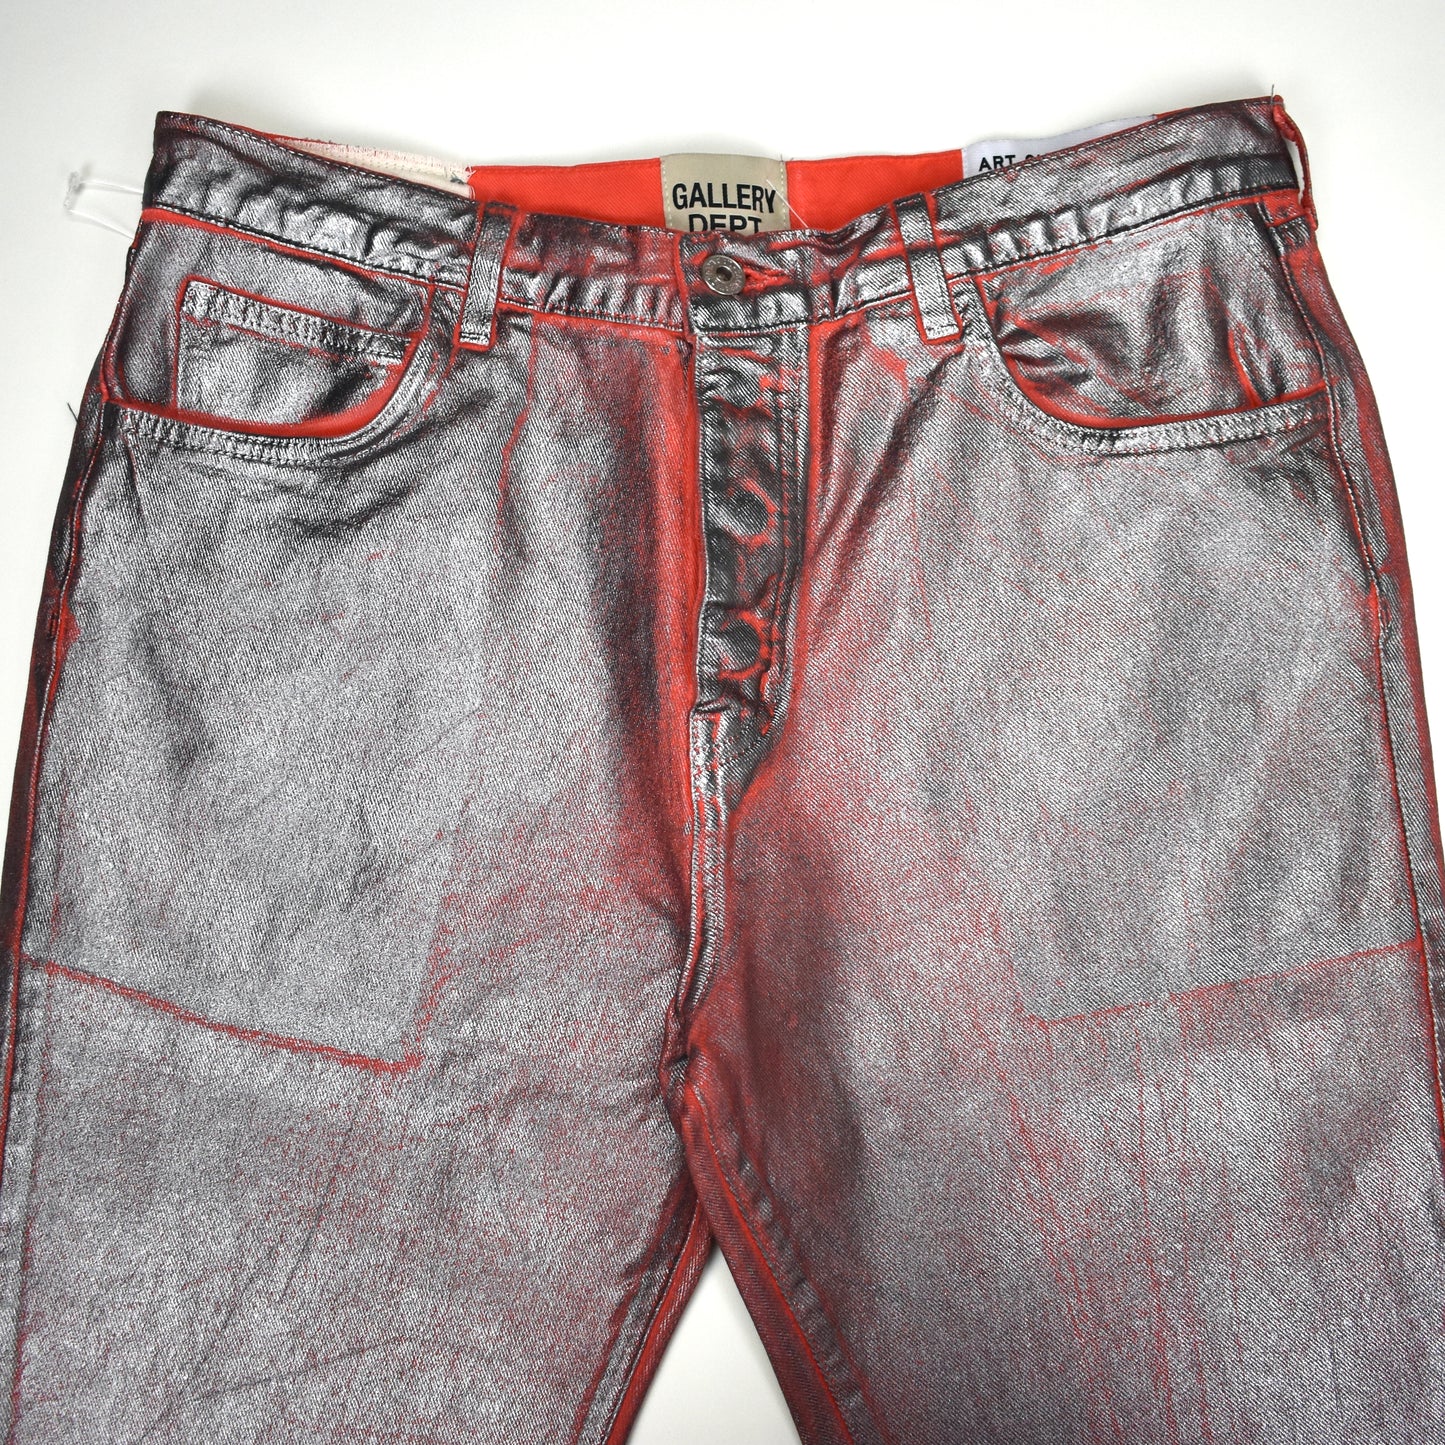 Gallery Dept. - Metallic Silver Painted Red Flare Denim Jeans